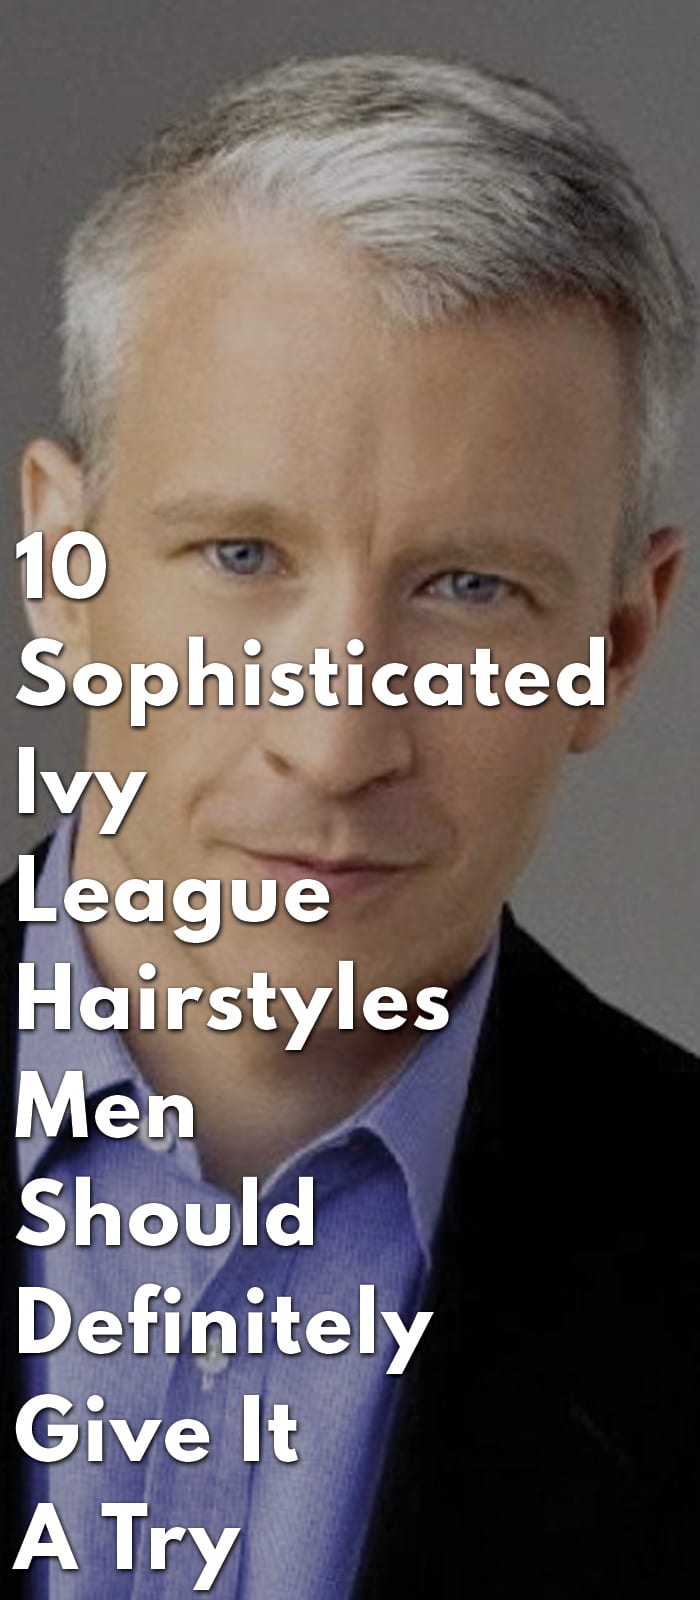 10-Sophisticated-Ivy-League-Hairstyles-Men-Should-Definitely-Give-It-A-Try